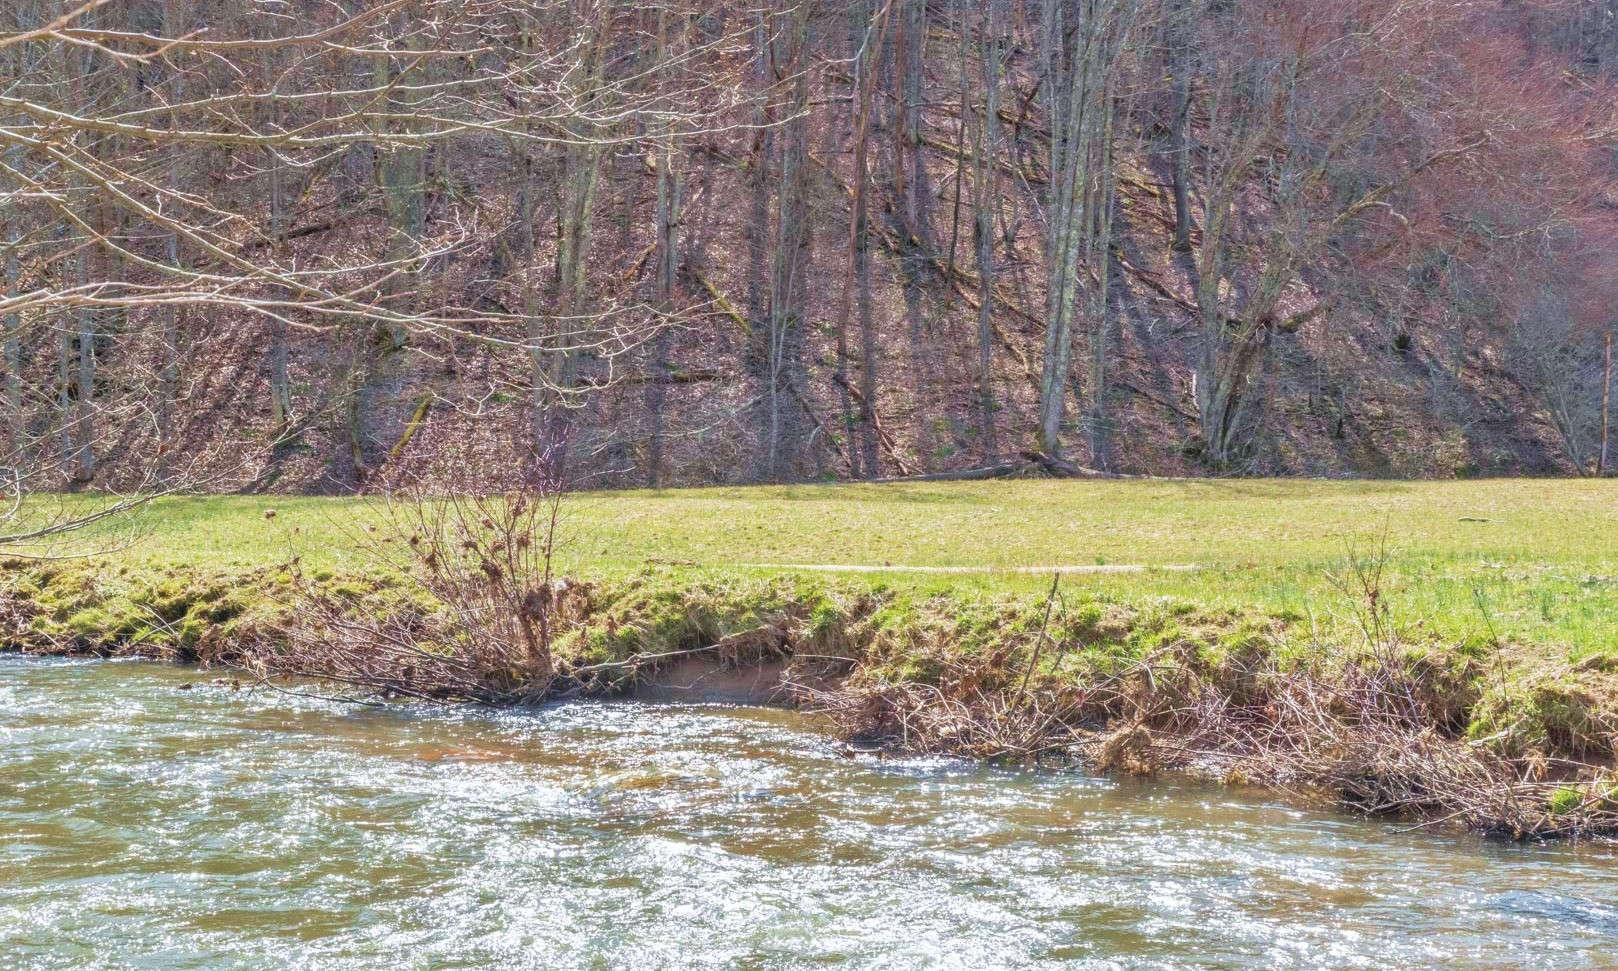 NC MOUNTAIN RIVERFRONT ACREAGE TRACT! Located in the River Breeze Estates community located in the Creston area of Ashe County, this 11.58 acre tract offers beautiful mountain views at the top of the tract, and serene New River views and frontage at the lower portion of the tract.